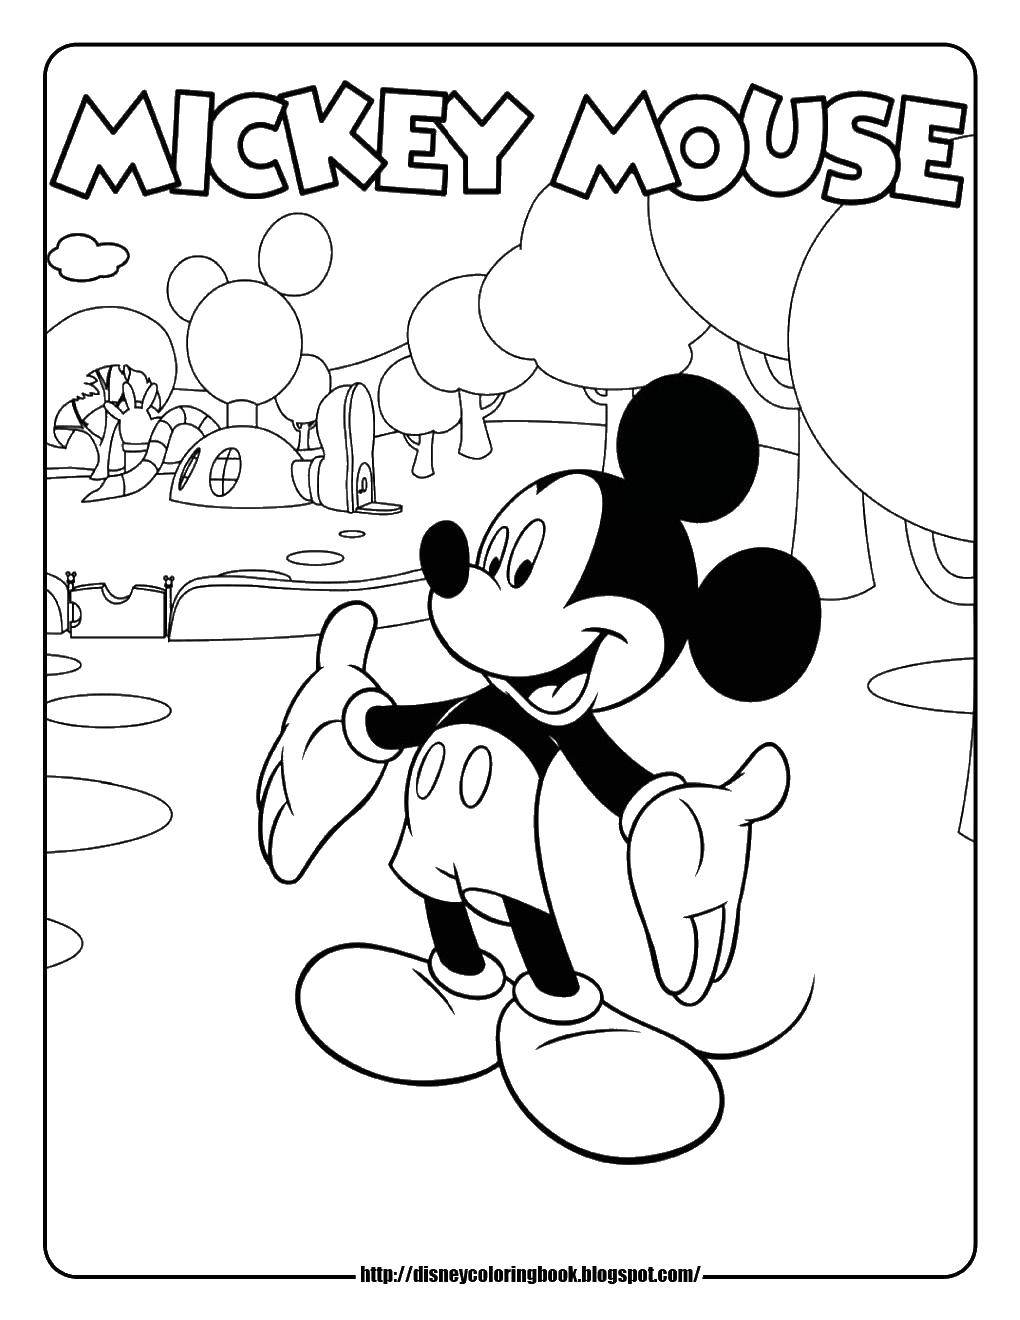 Coloring Mouse Mickey mouse. Category Mickey mouse. Tags:  Disney cartoons, disney, Mickey mouse, mouse.